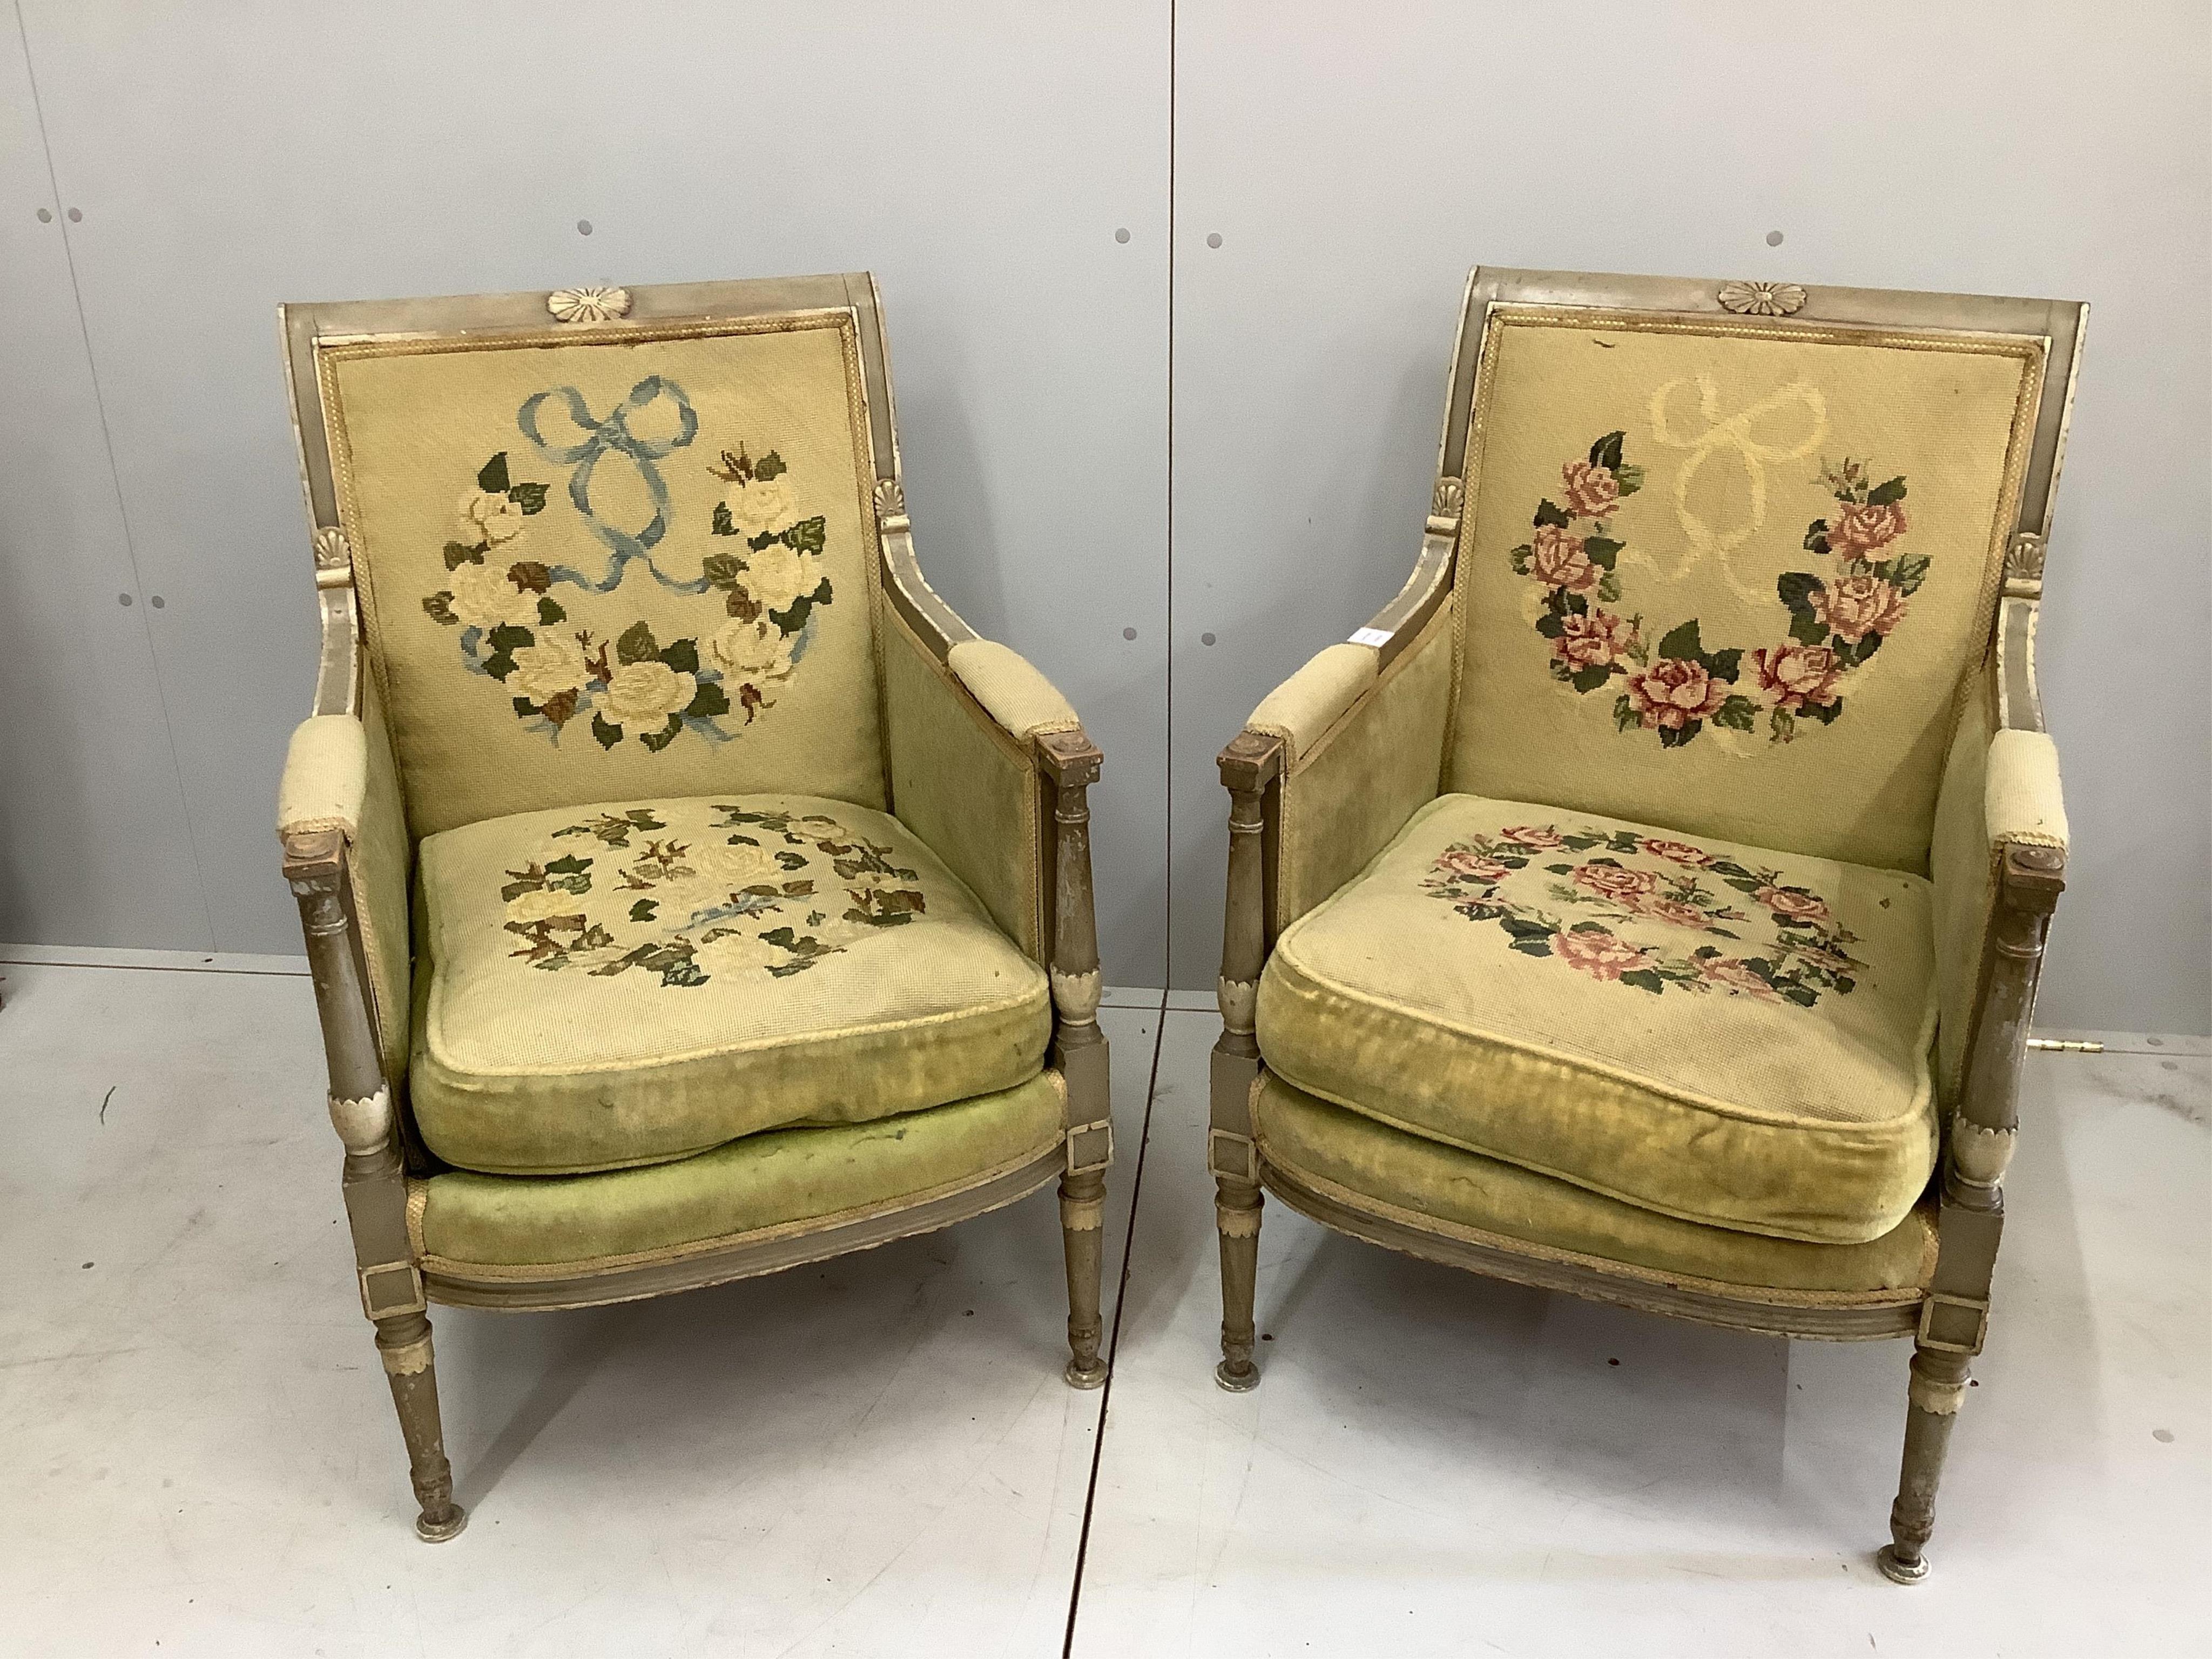 A pair of 19th century French chairs, width 60cm, depth 60cm, height 88cm                                                                                                                                                   